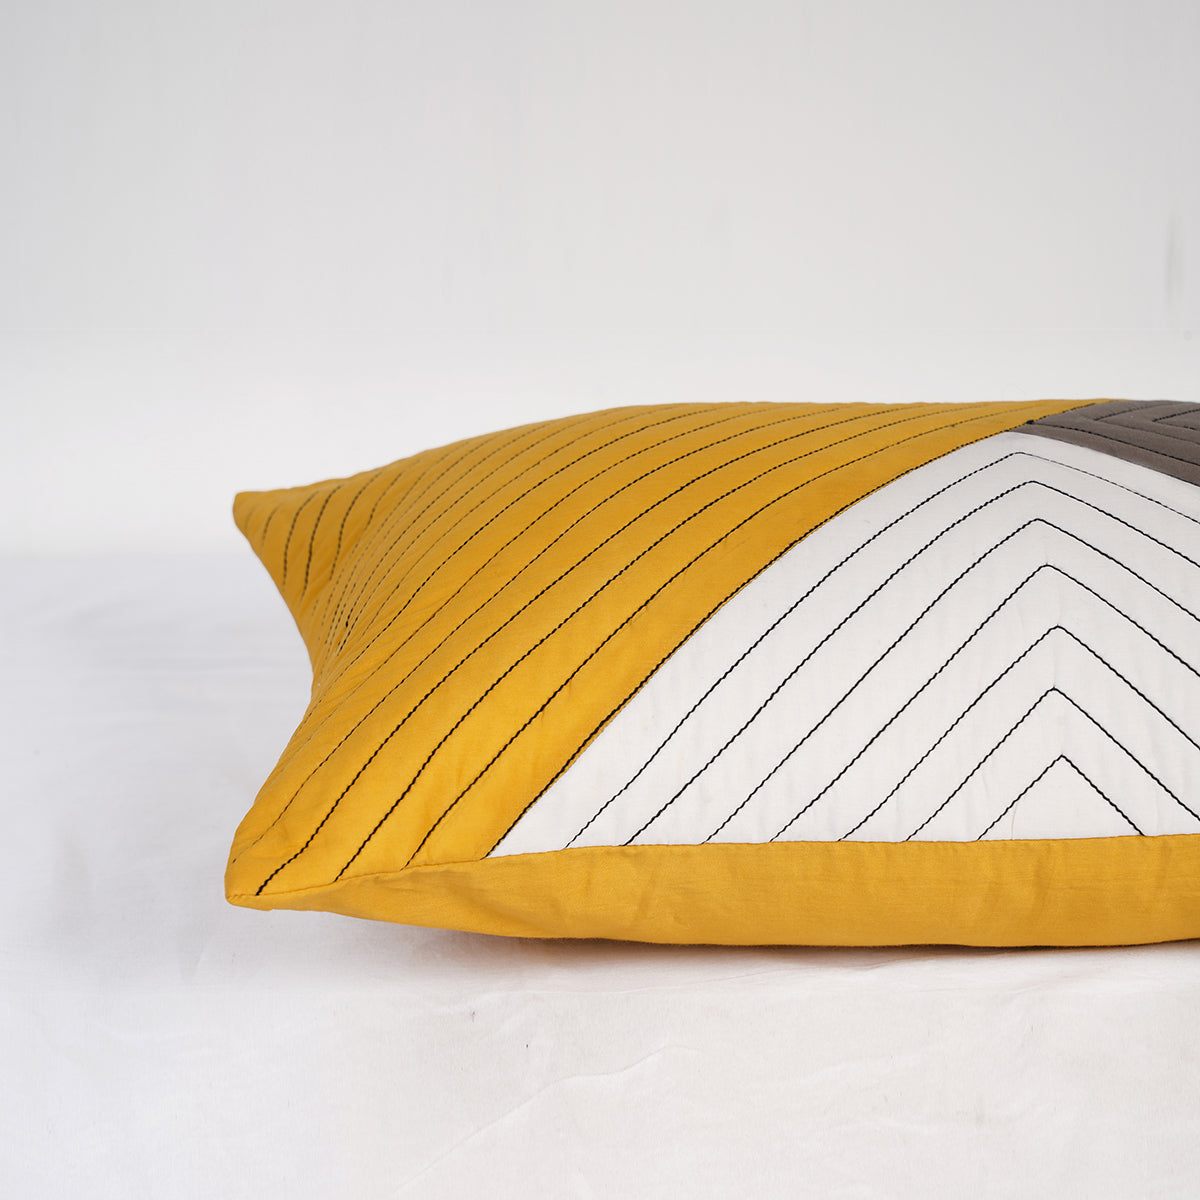 MODERN RETRO - Mustard yellow patchwork and quilted pillow cover, colour block cushion cover, sizes available